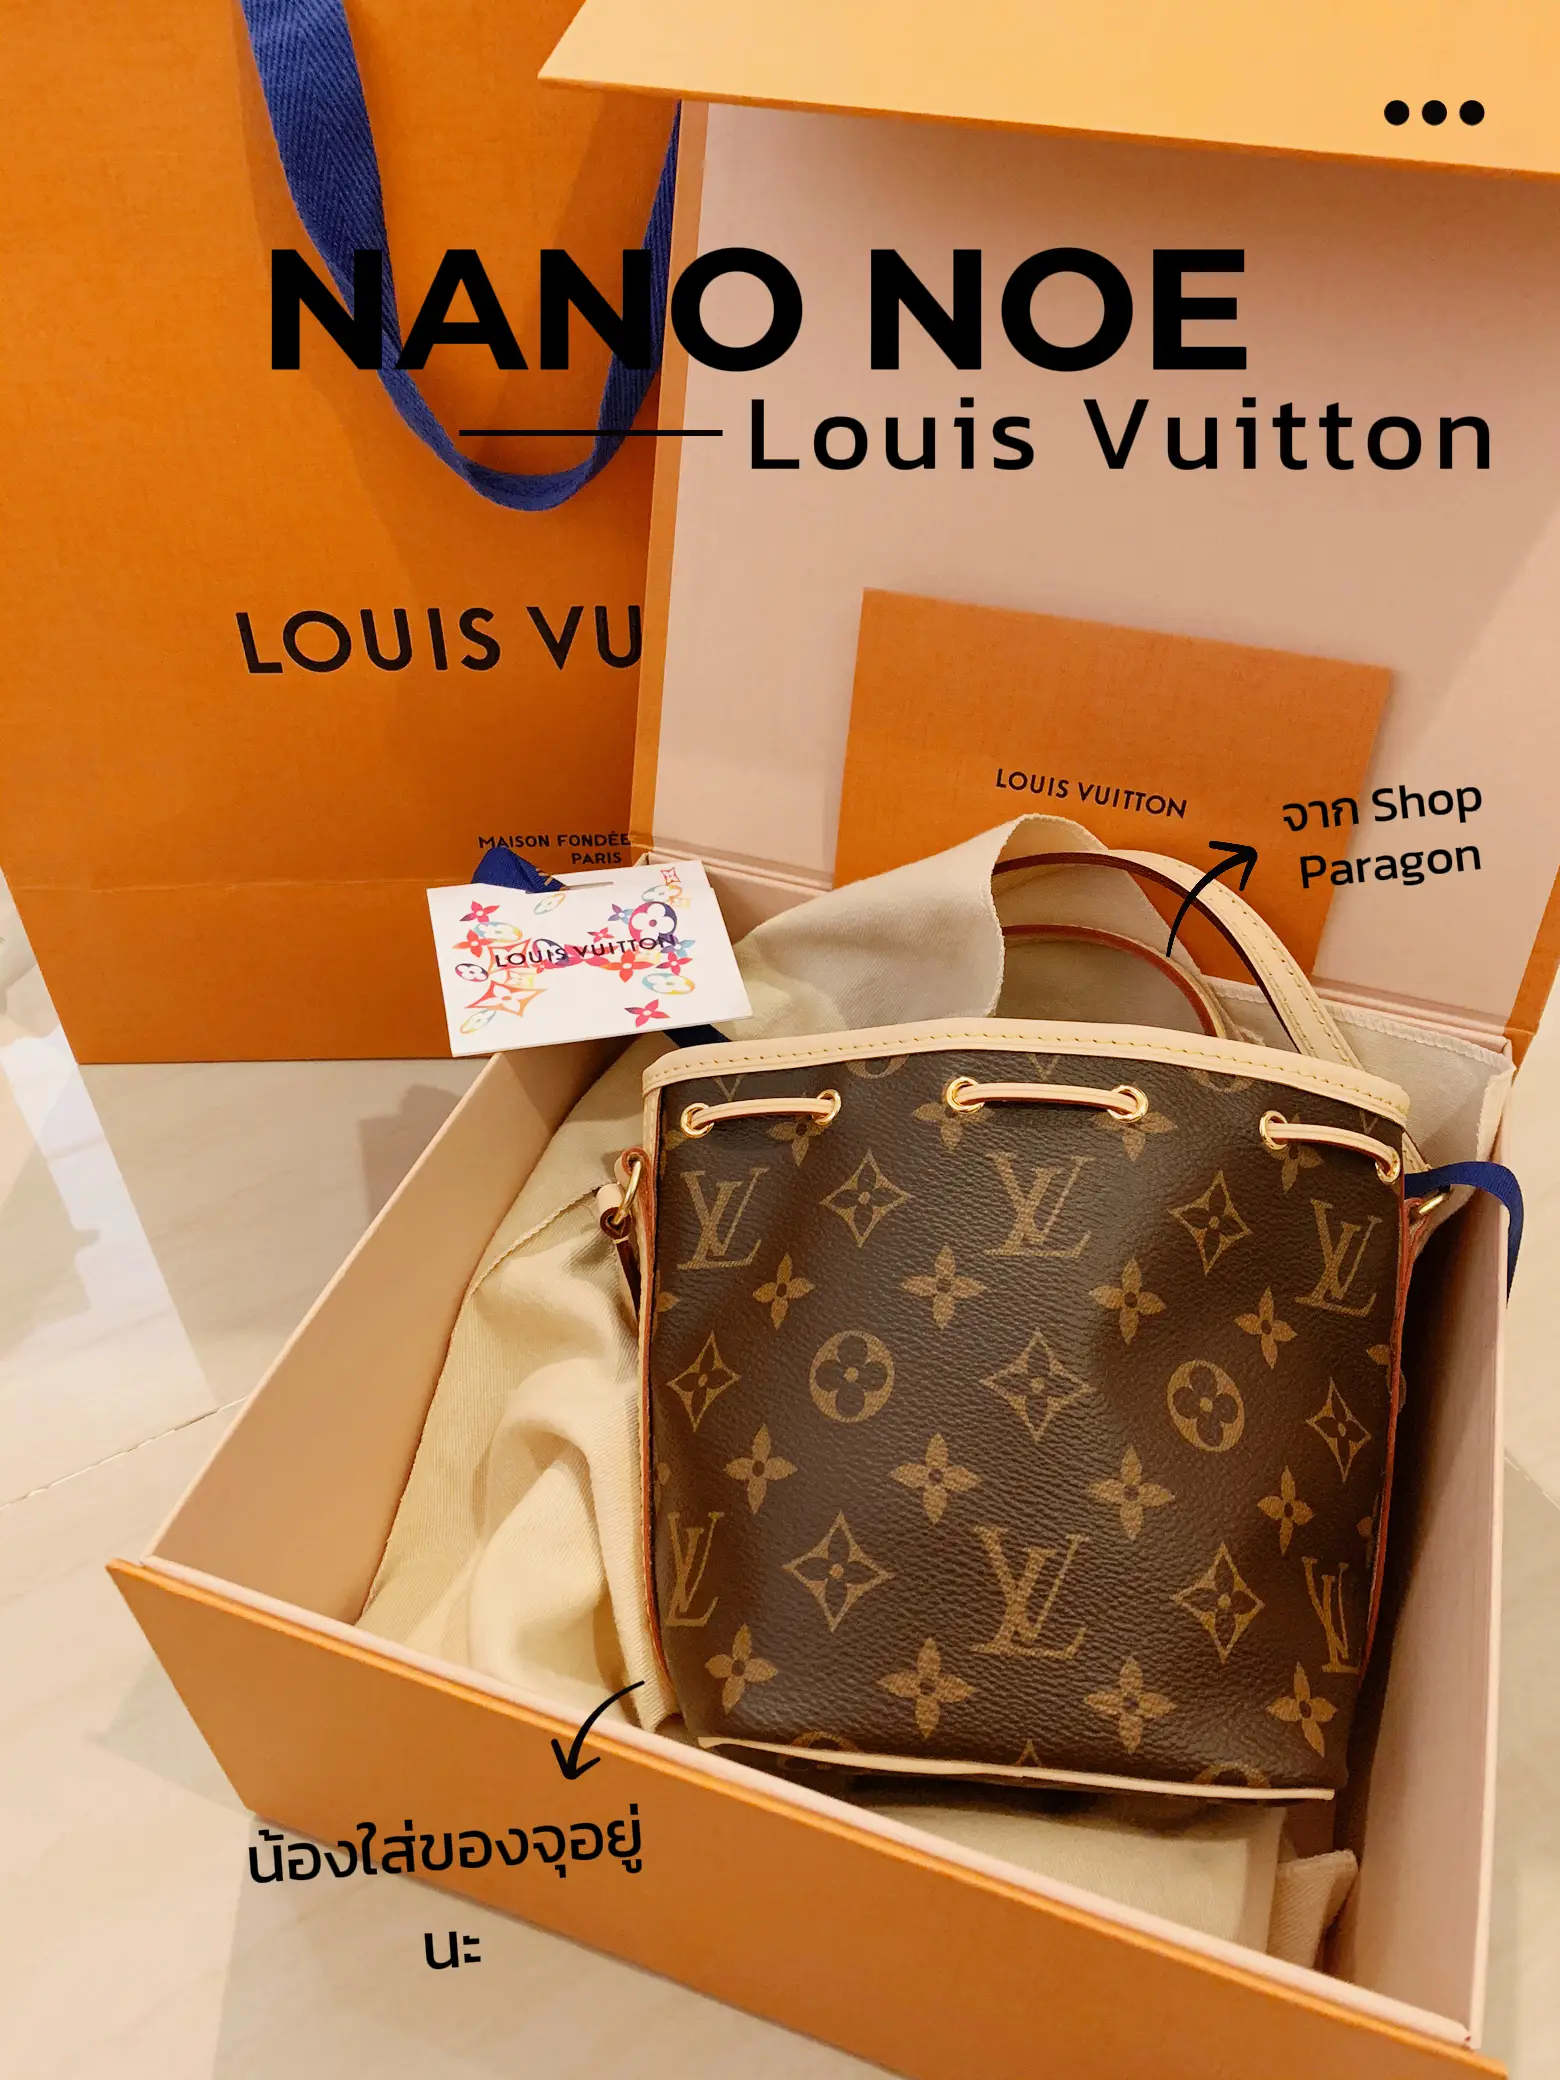 Louis Vuitton Makeup Bag from Dhgate. Check oht that link in the Bio #